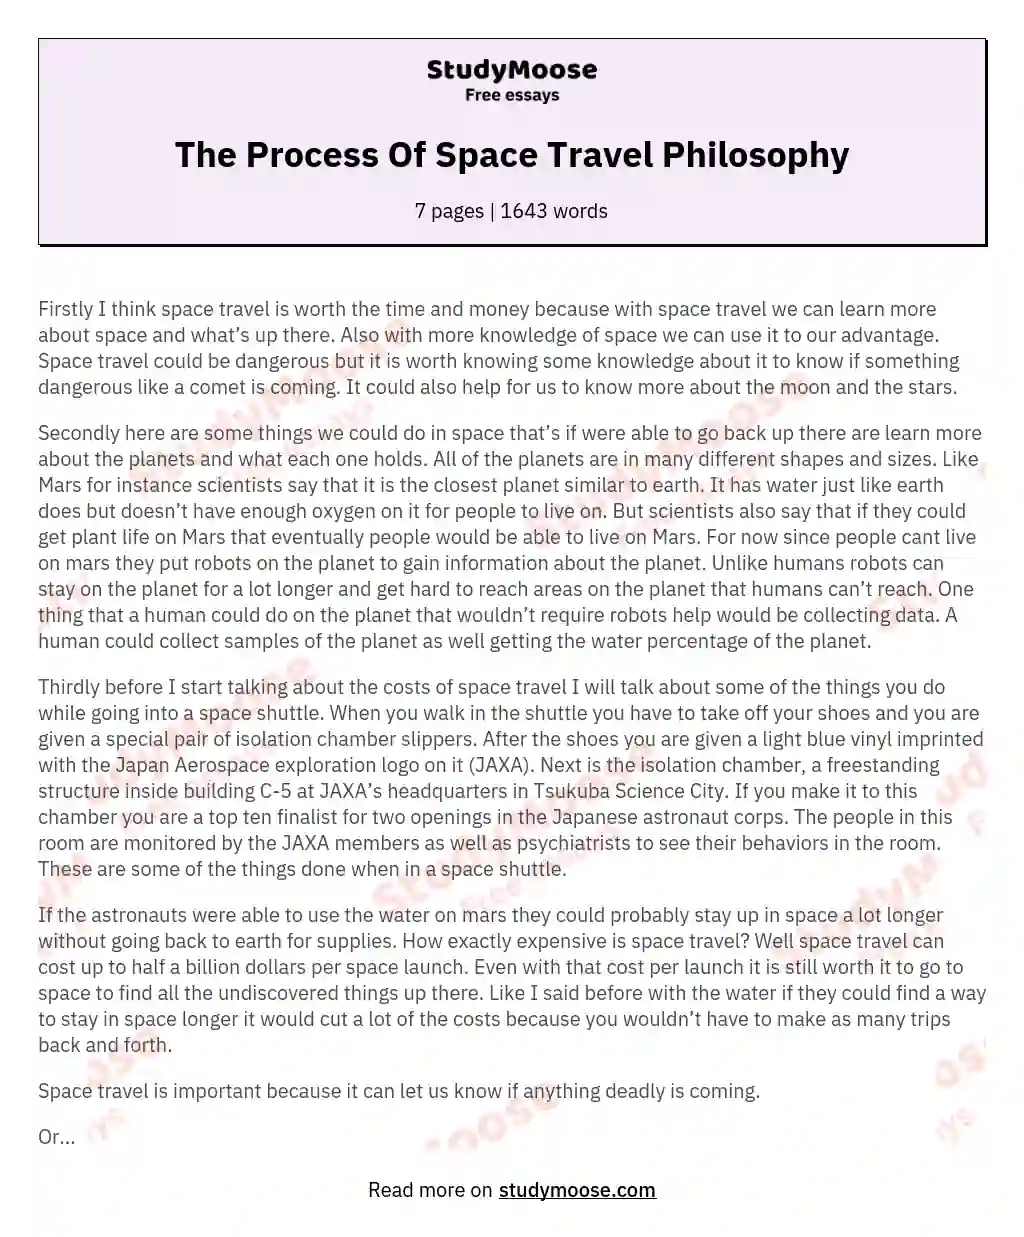 The Process Of Space Travel Philosophy essay